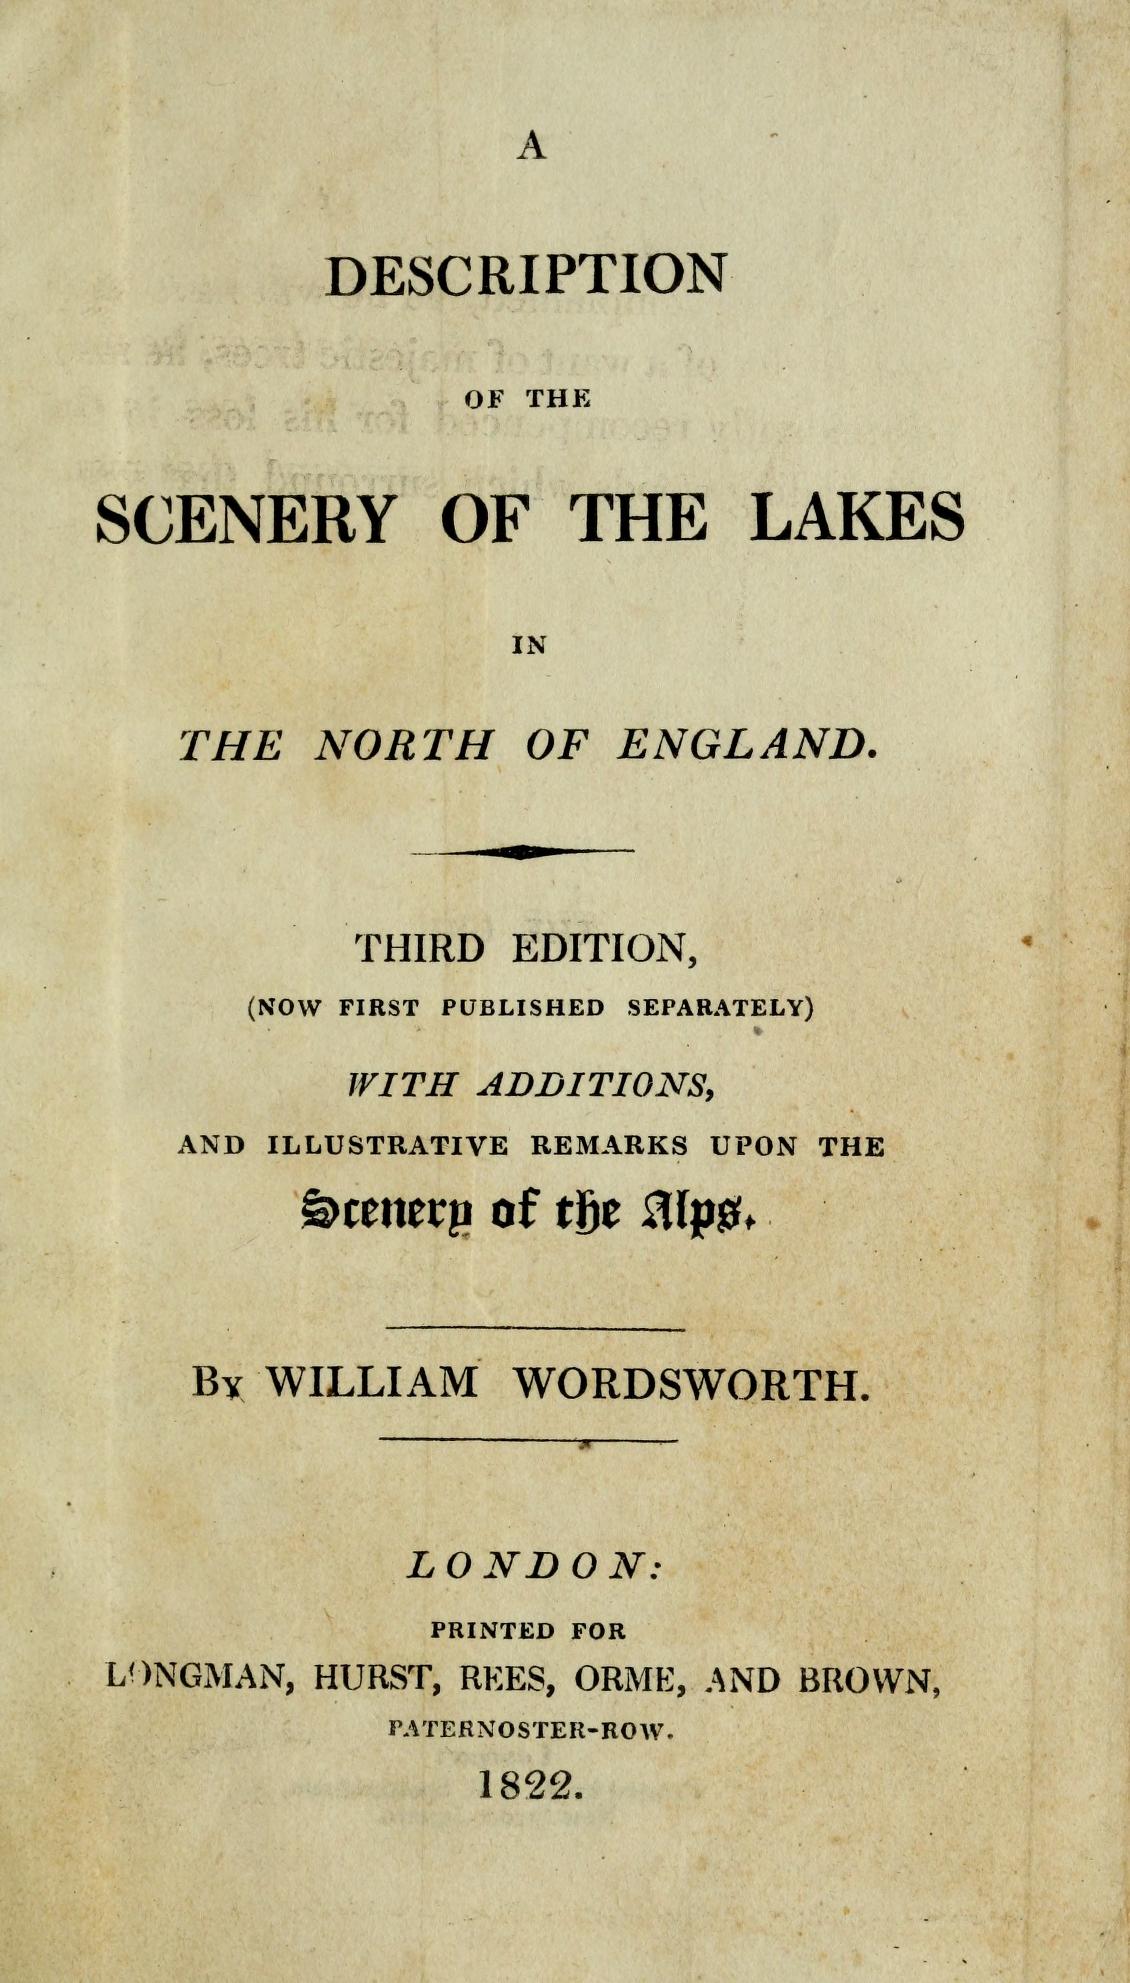 Title page from William Wordsworth’s Description of the Scenery of the Lakes in the North of England.